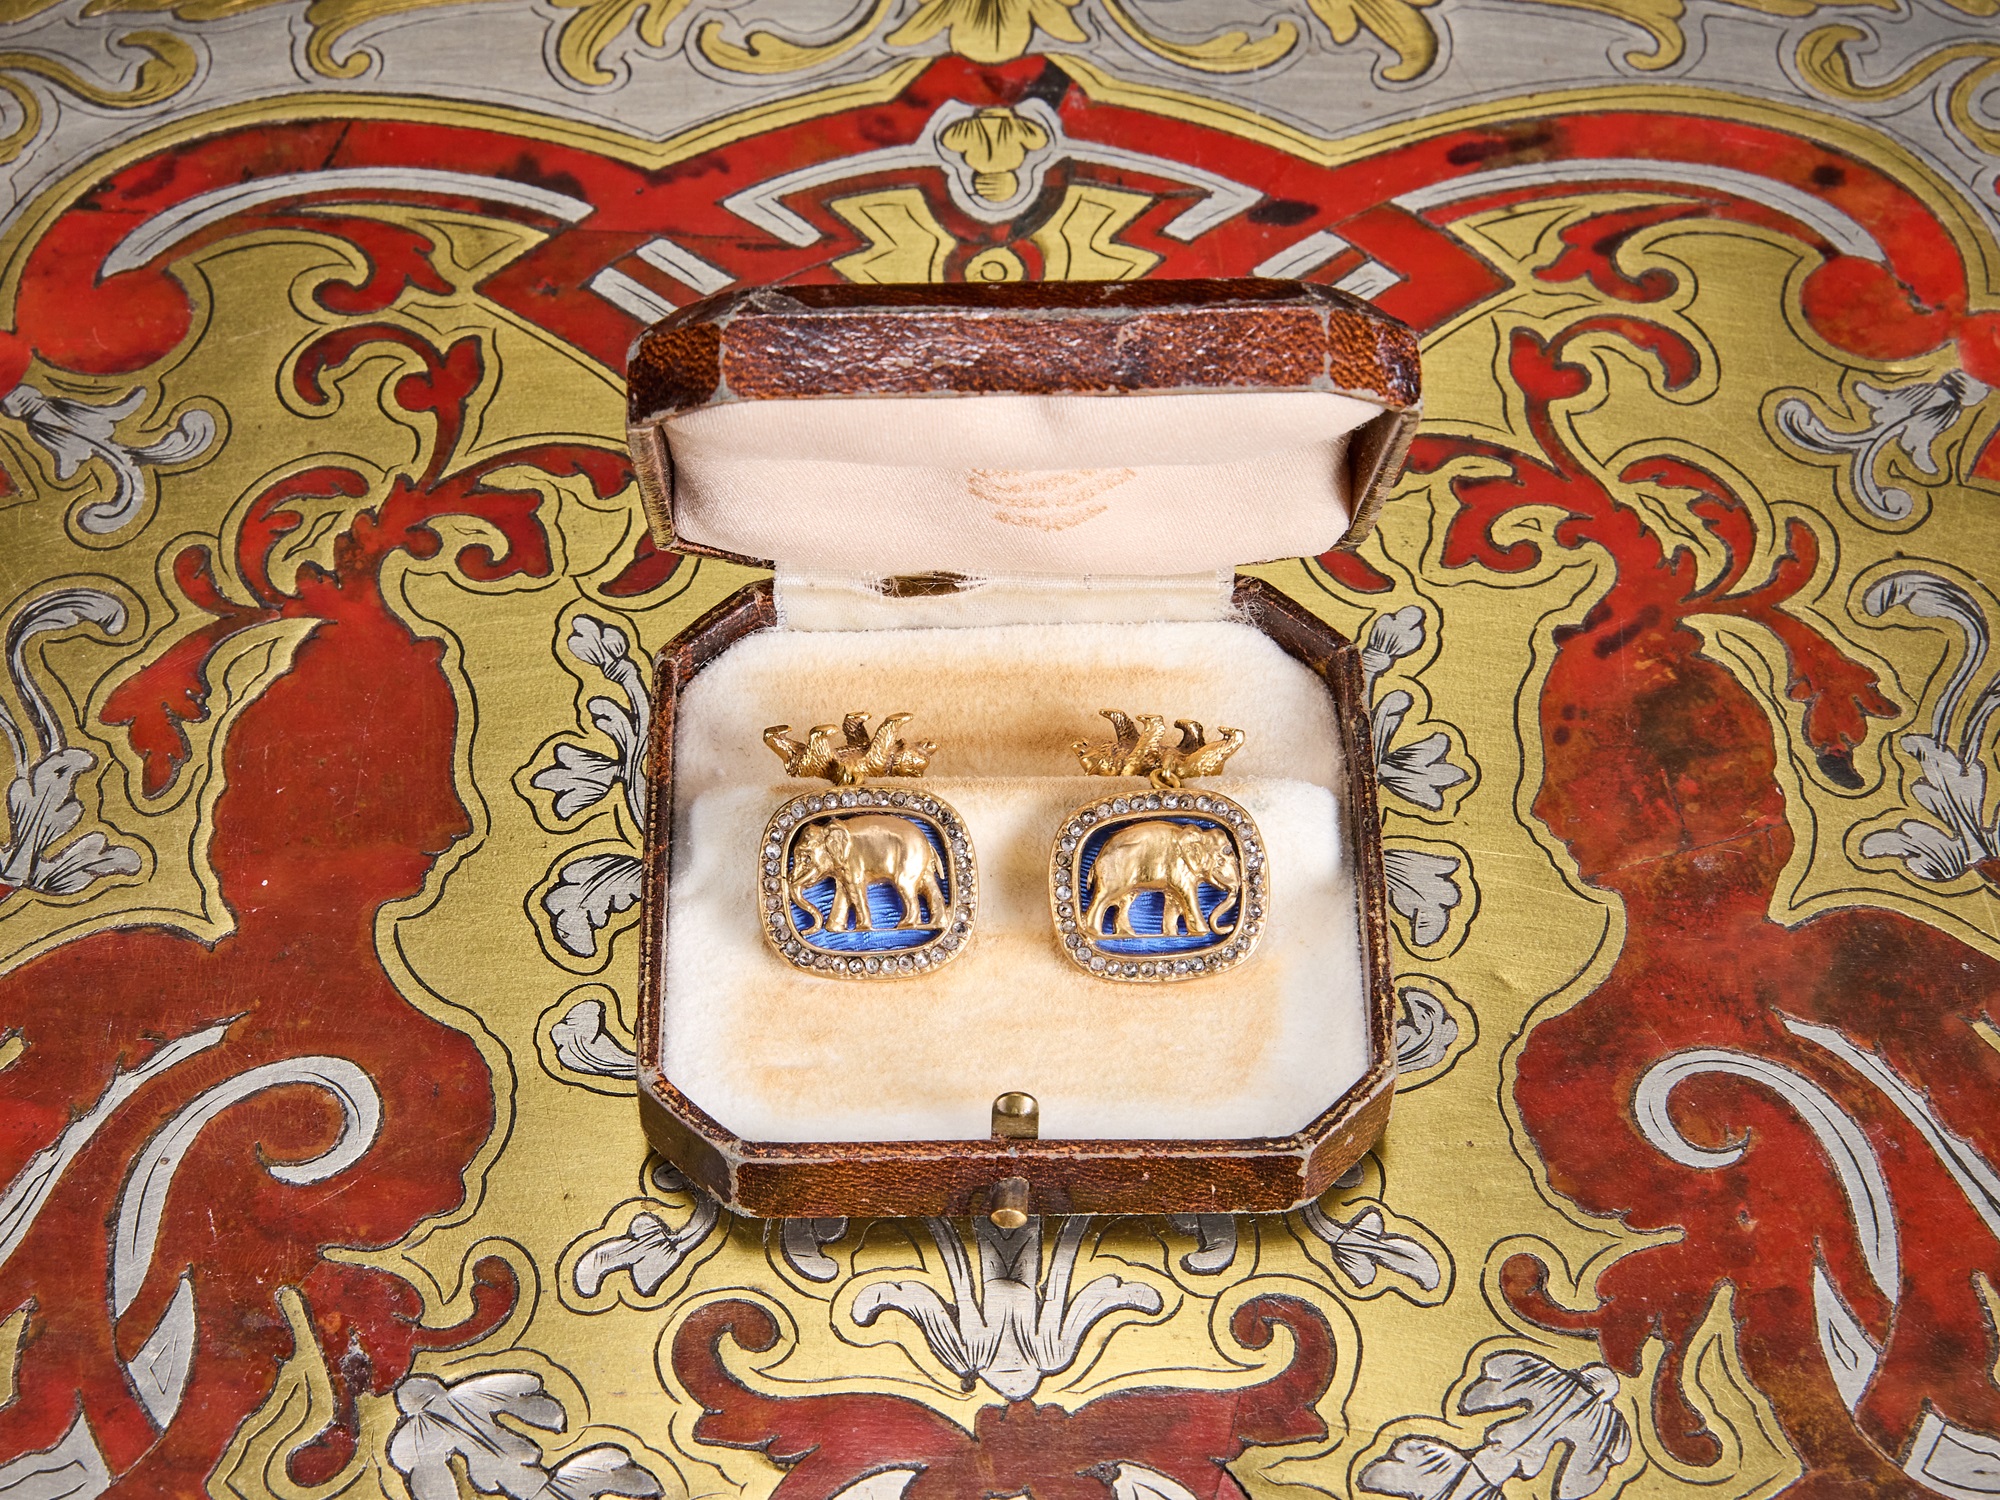 A PAIR OF FABERGE STYLE DIAMOND ENCRUSTED, SILVER GILT AND ENAMELLED CUFFLINKS